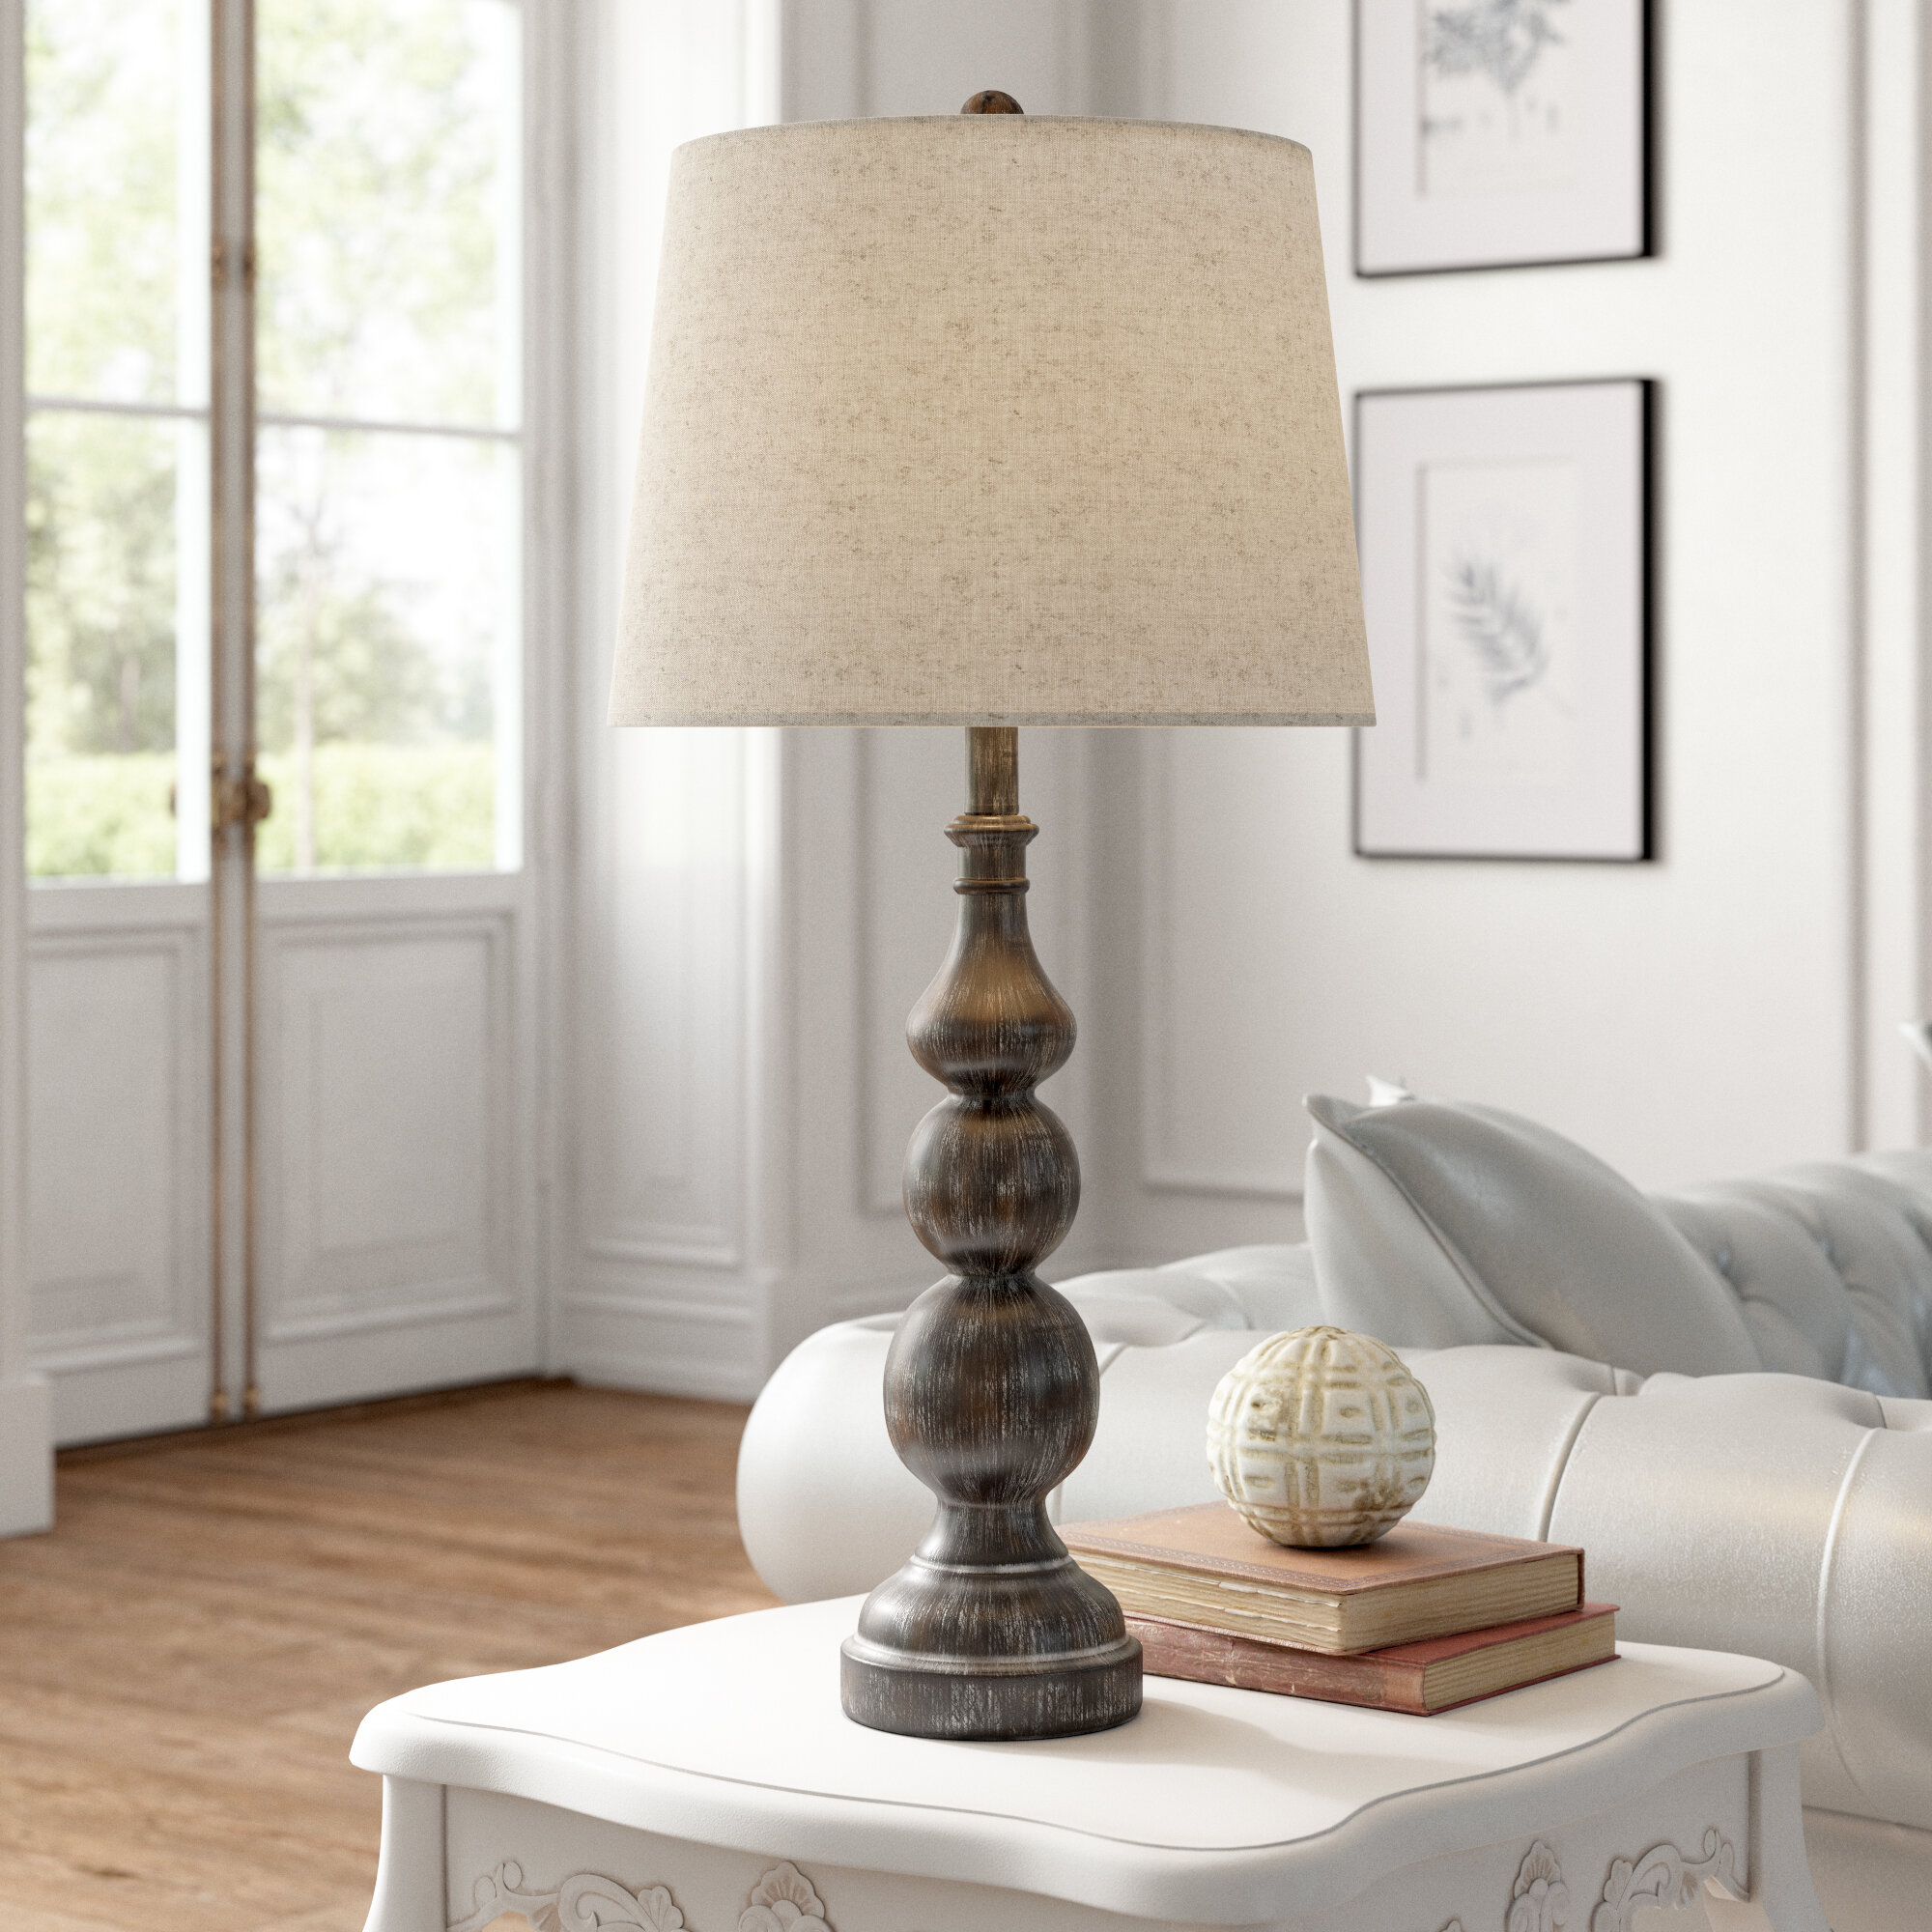 Bedside Table Lamps You Ll Love In 2020 Wayfair,Design Your Kitchen Online Uk